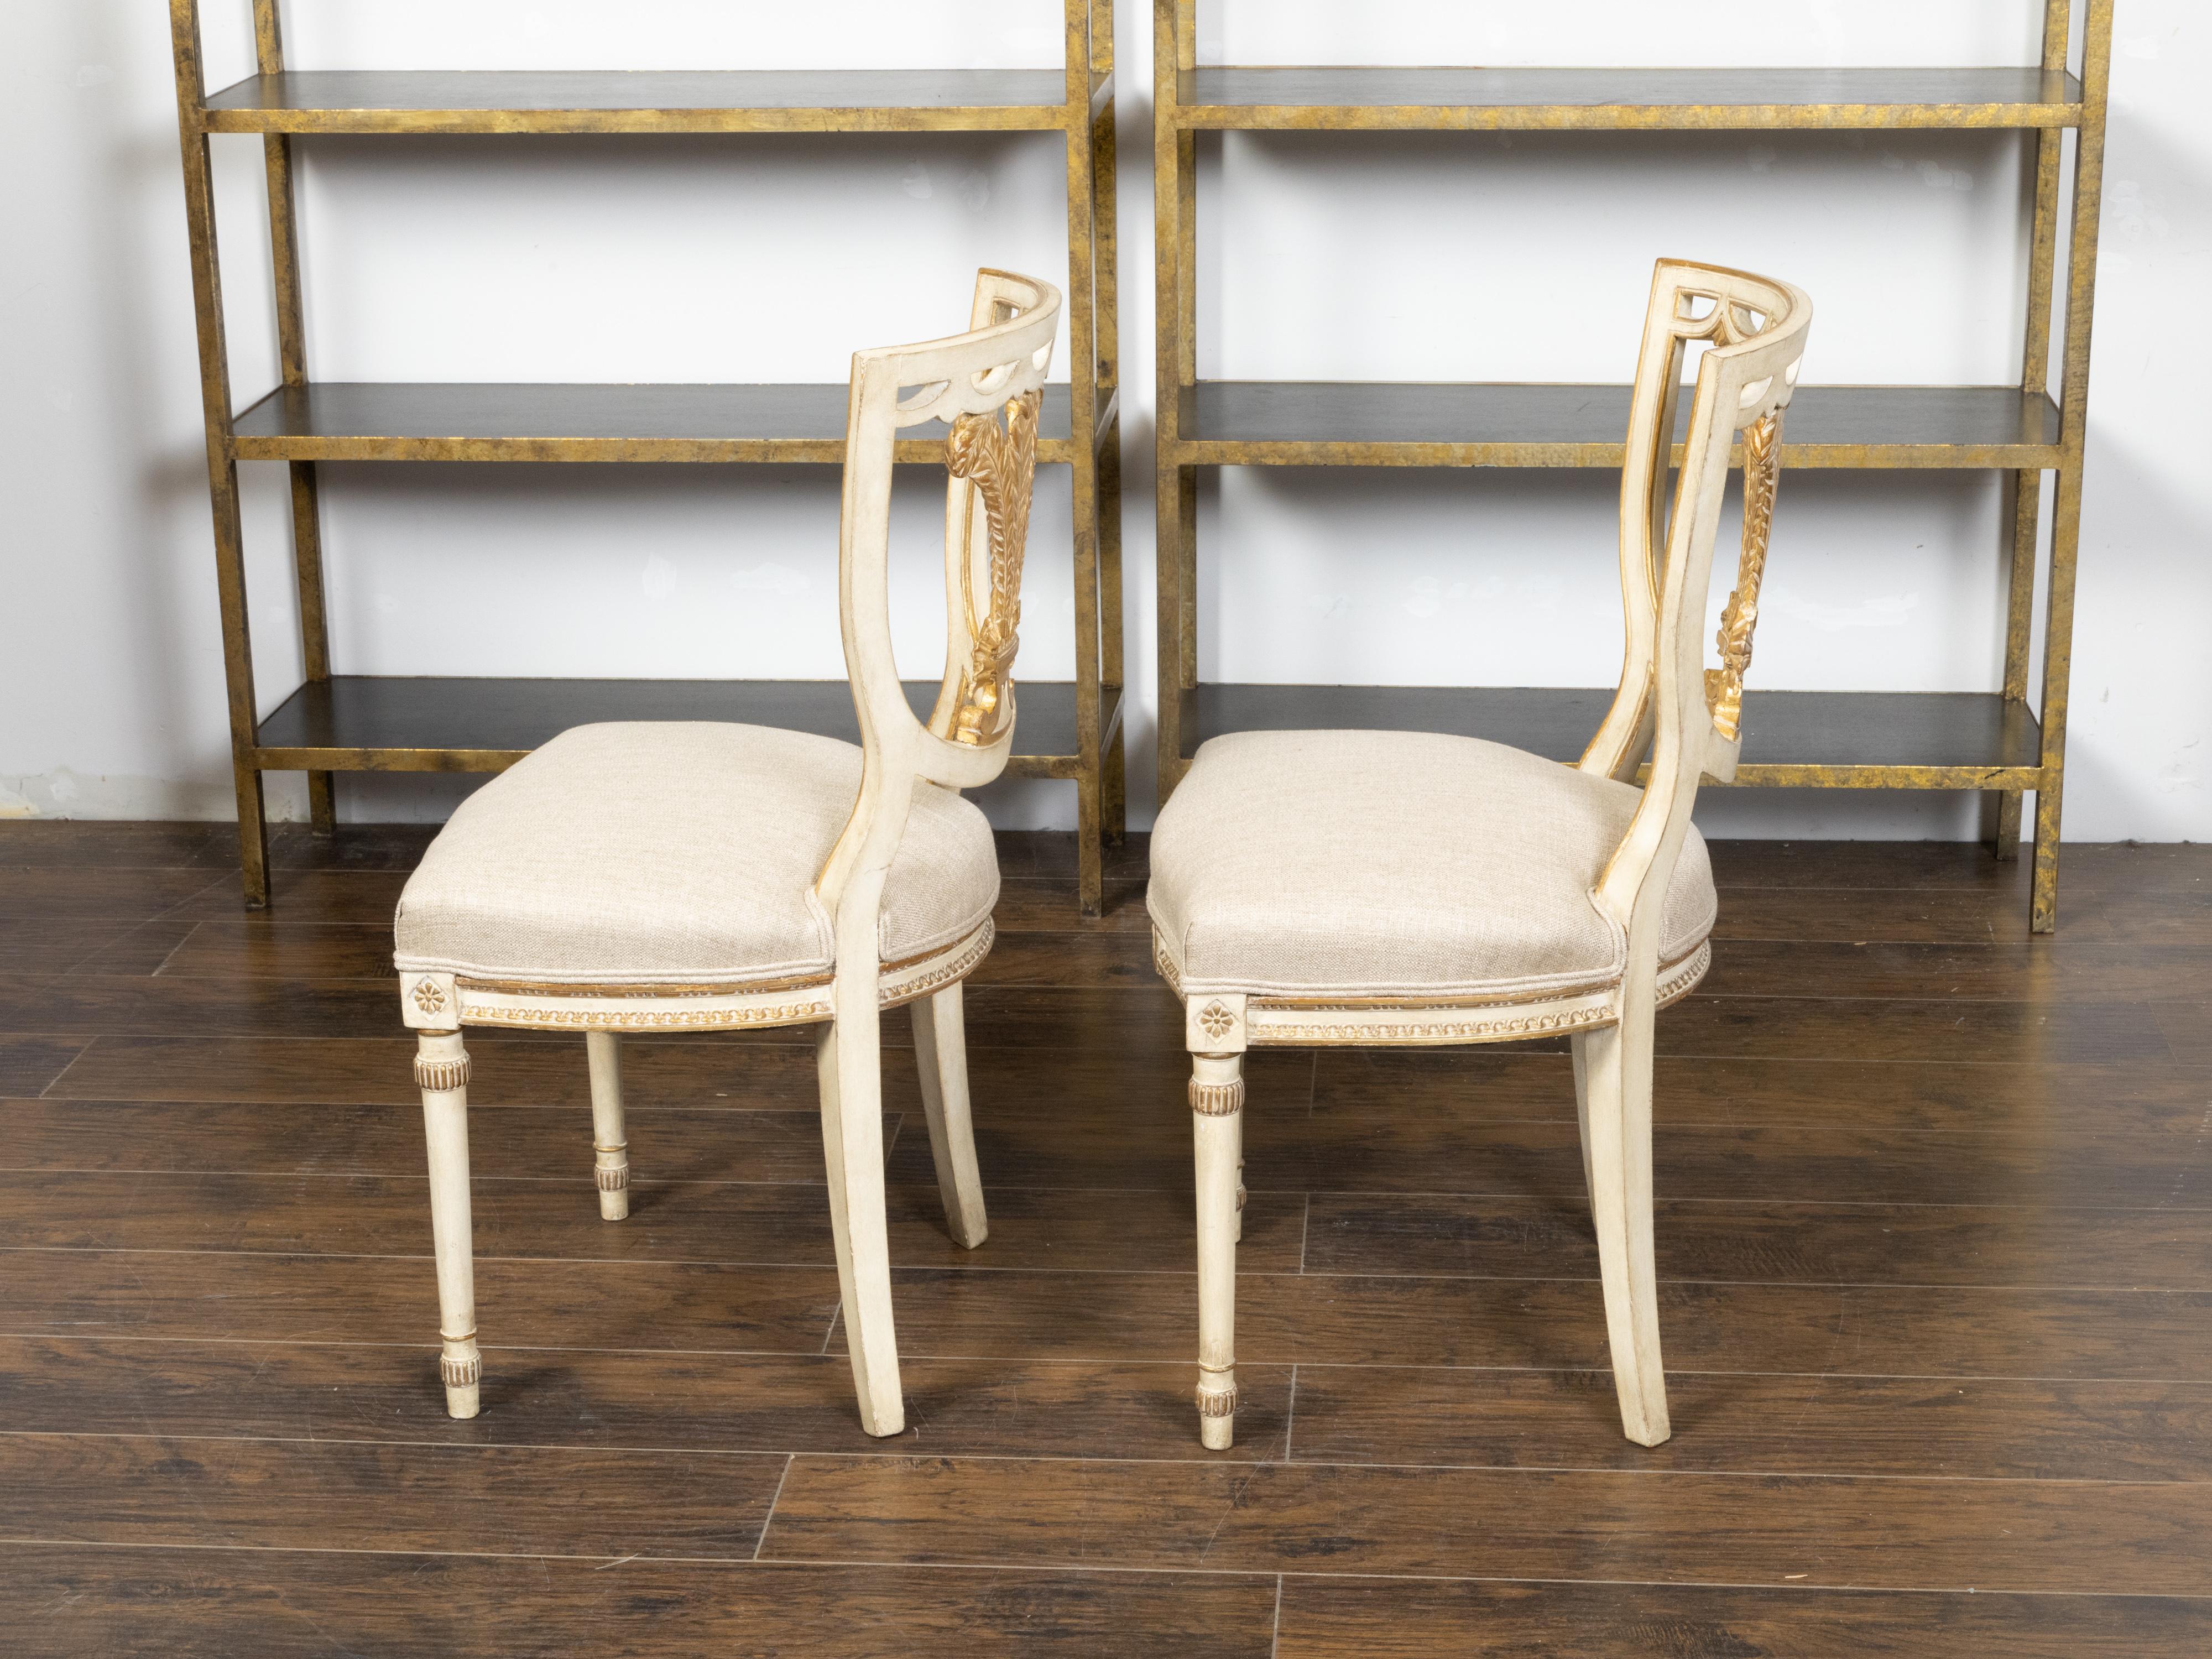 20th Century Pair of English 1900s Neoclassical Style Painted and Gilt Chairs with Feathers For Sale